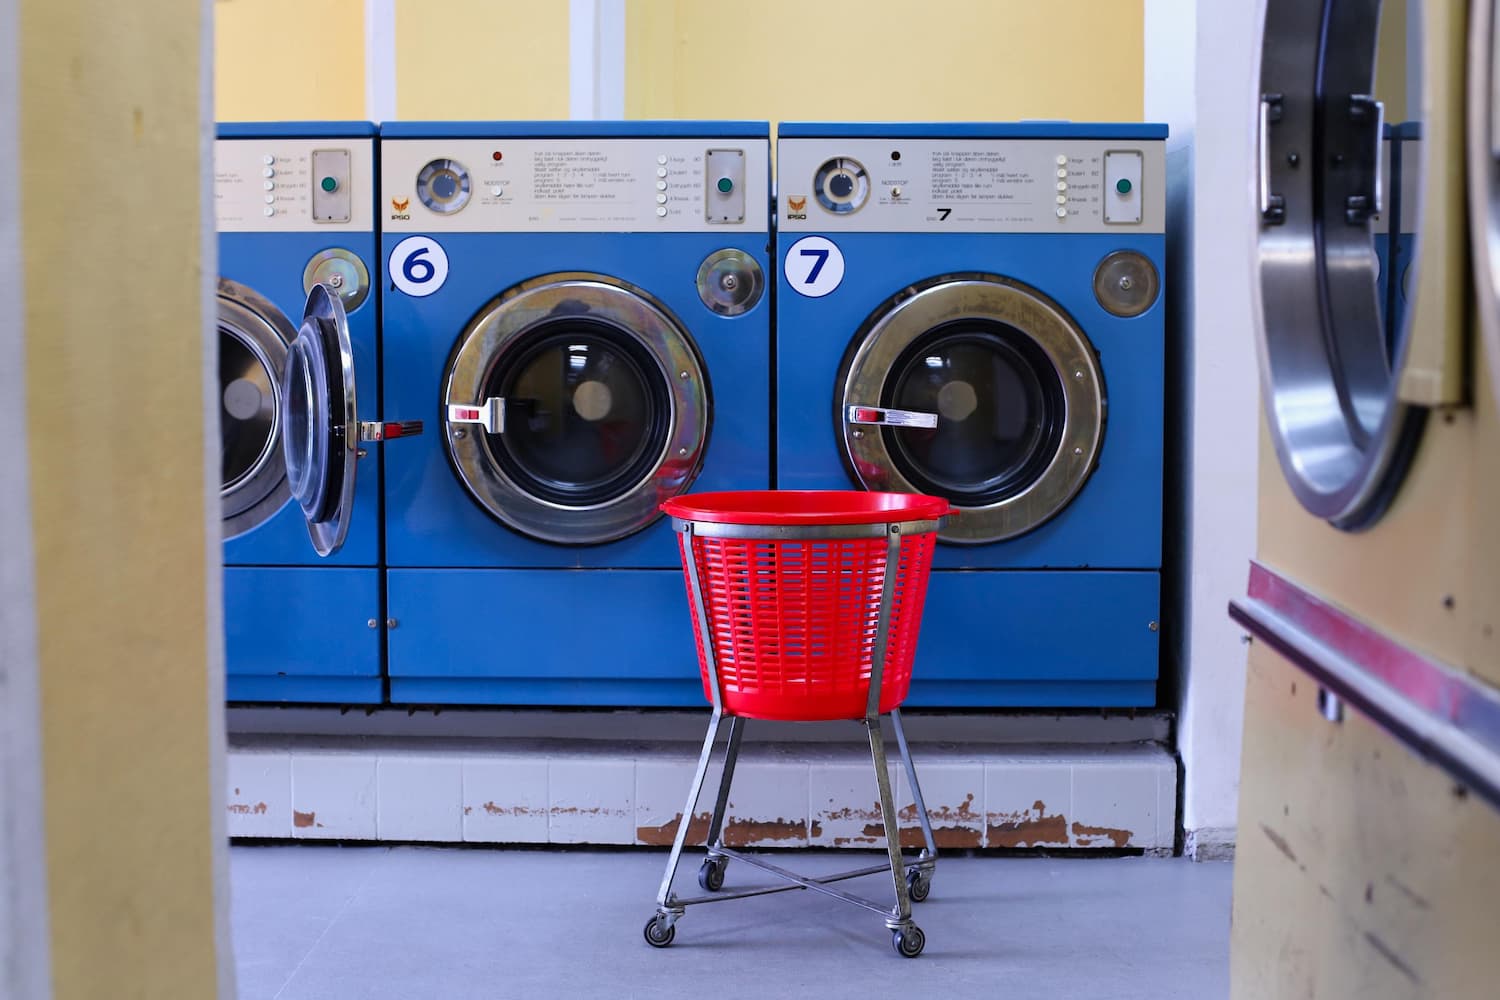 Three retro blue washing machines with a red laundry basket in front